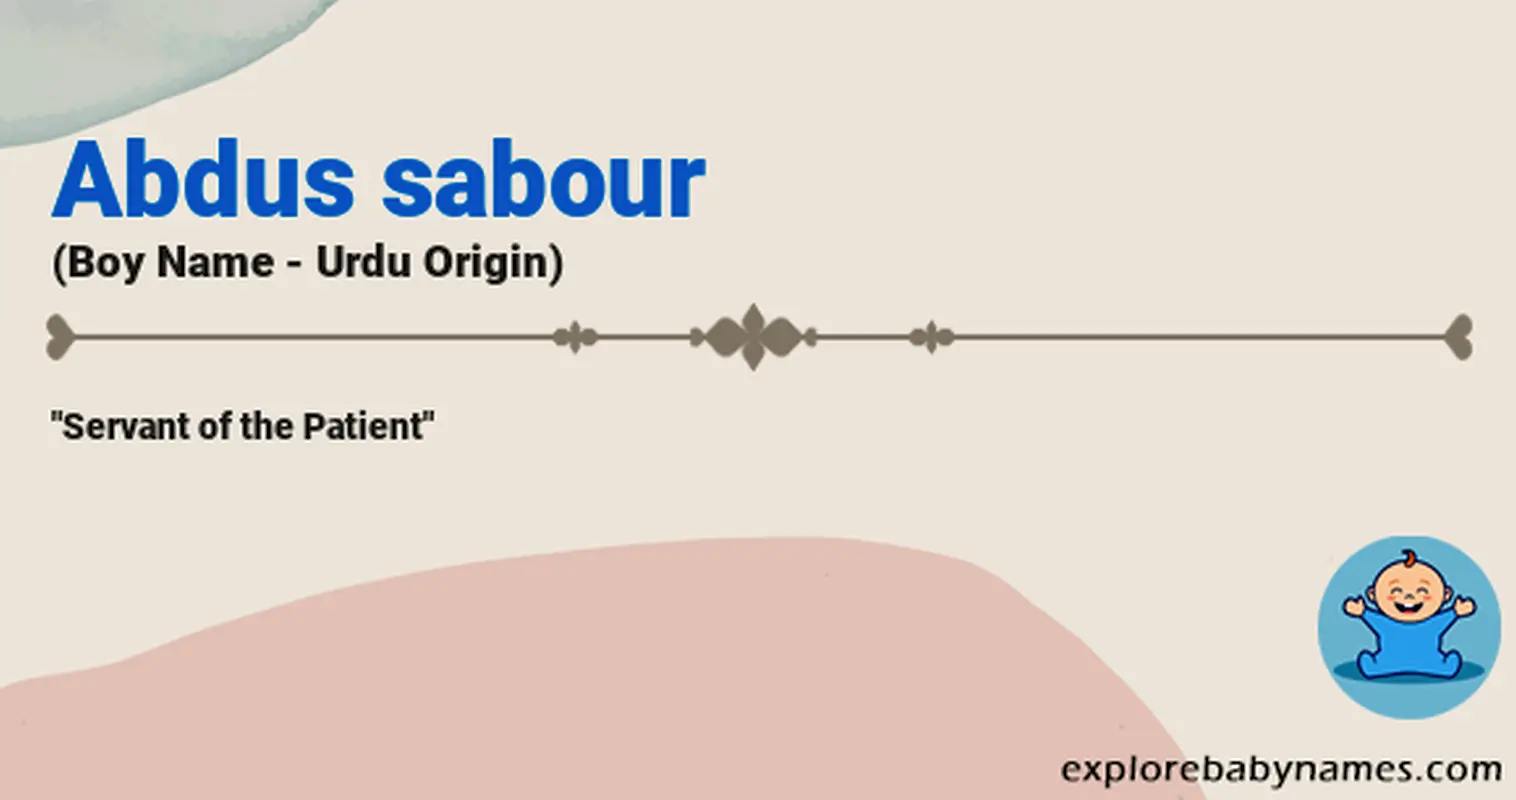 Meaning of Abdus sabour